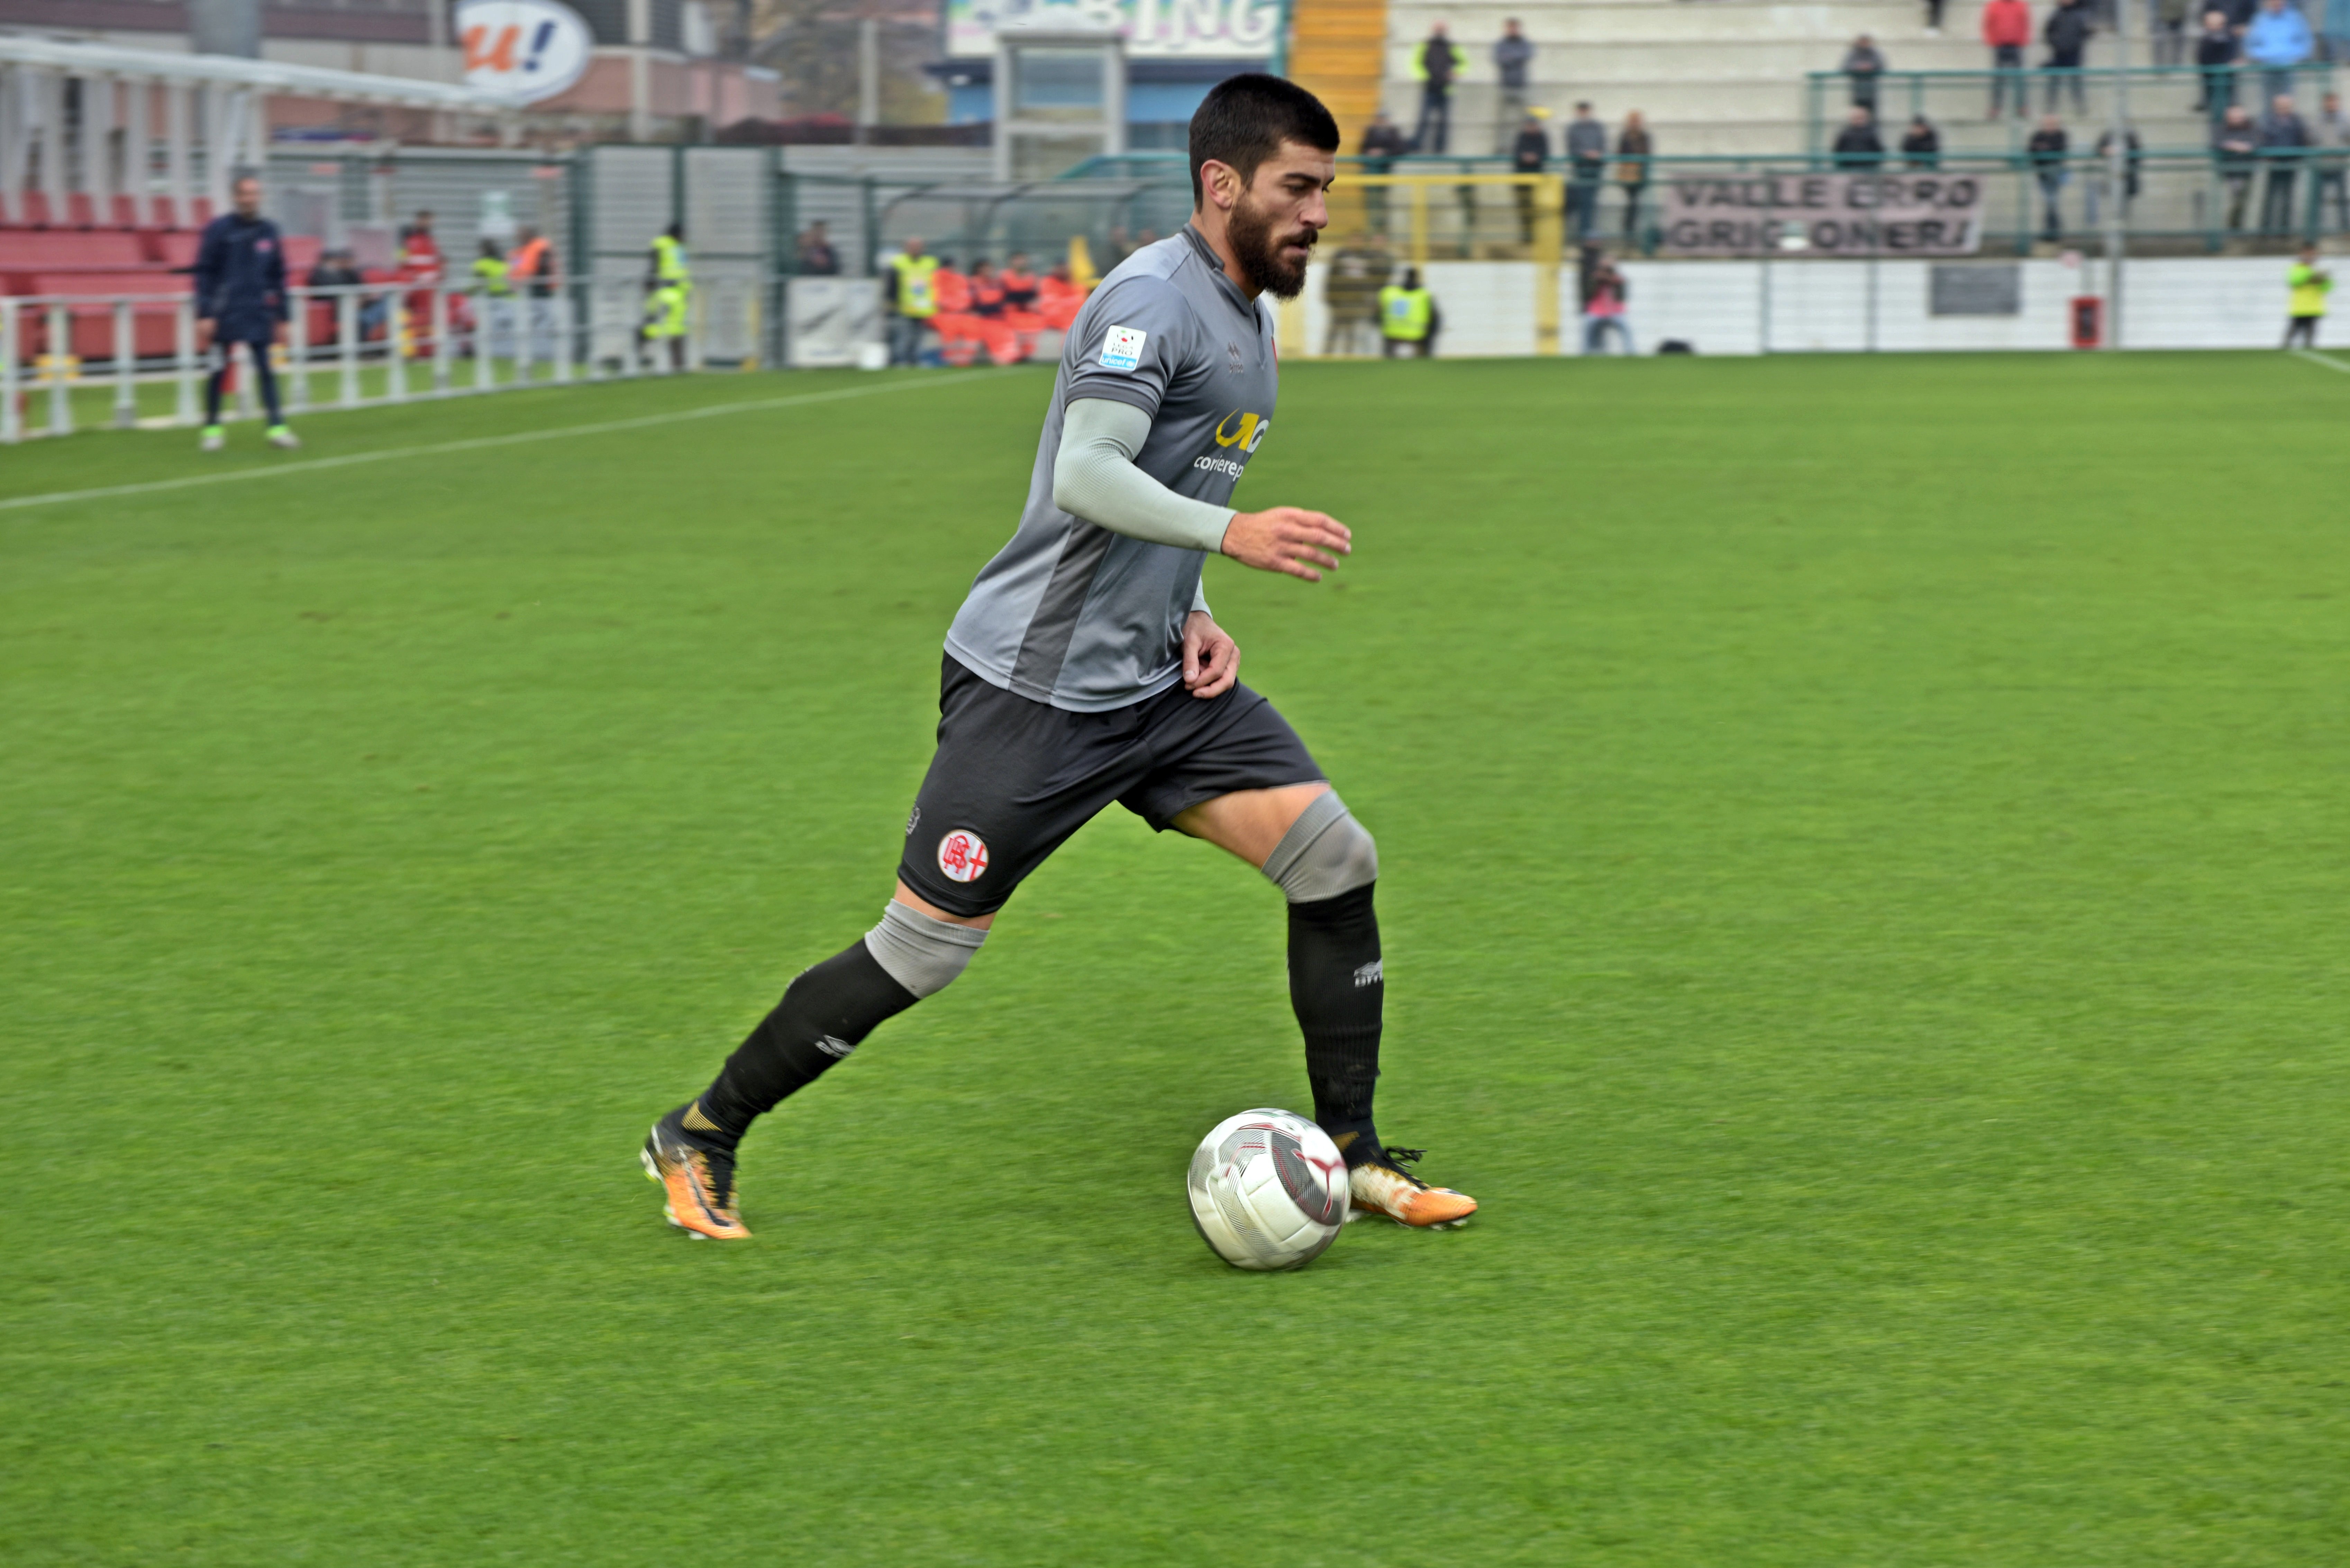 Lucchese-Alessandria 2-1: FINALE